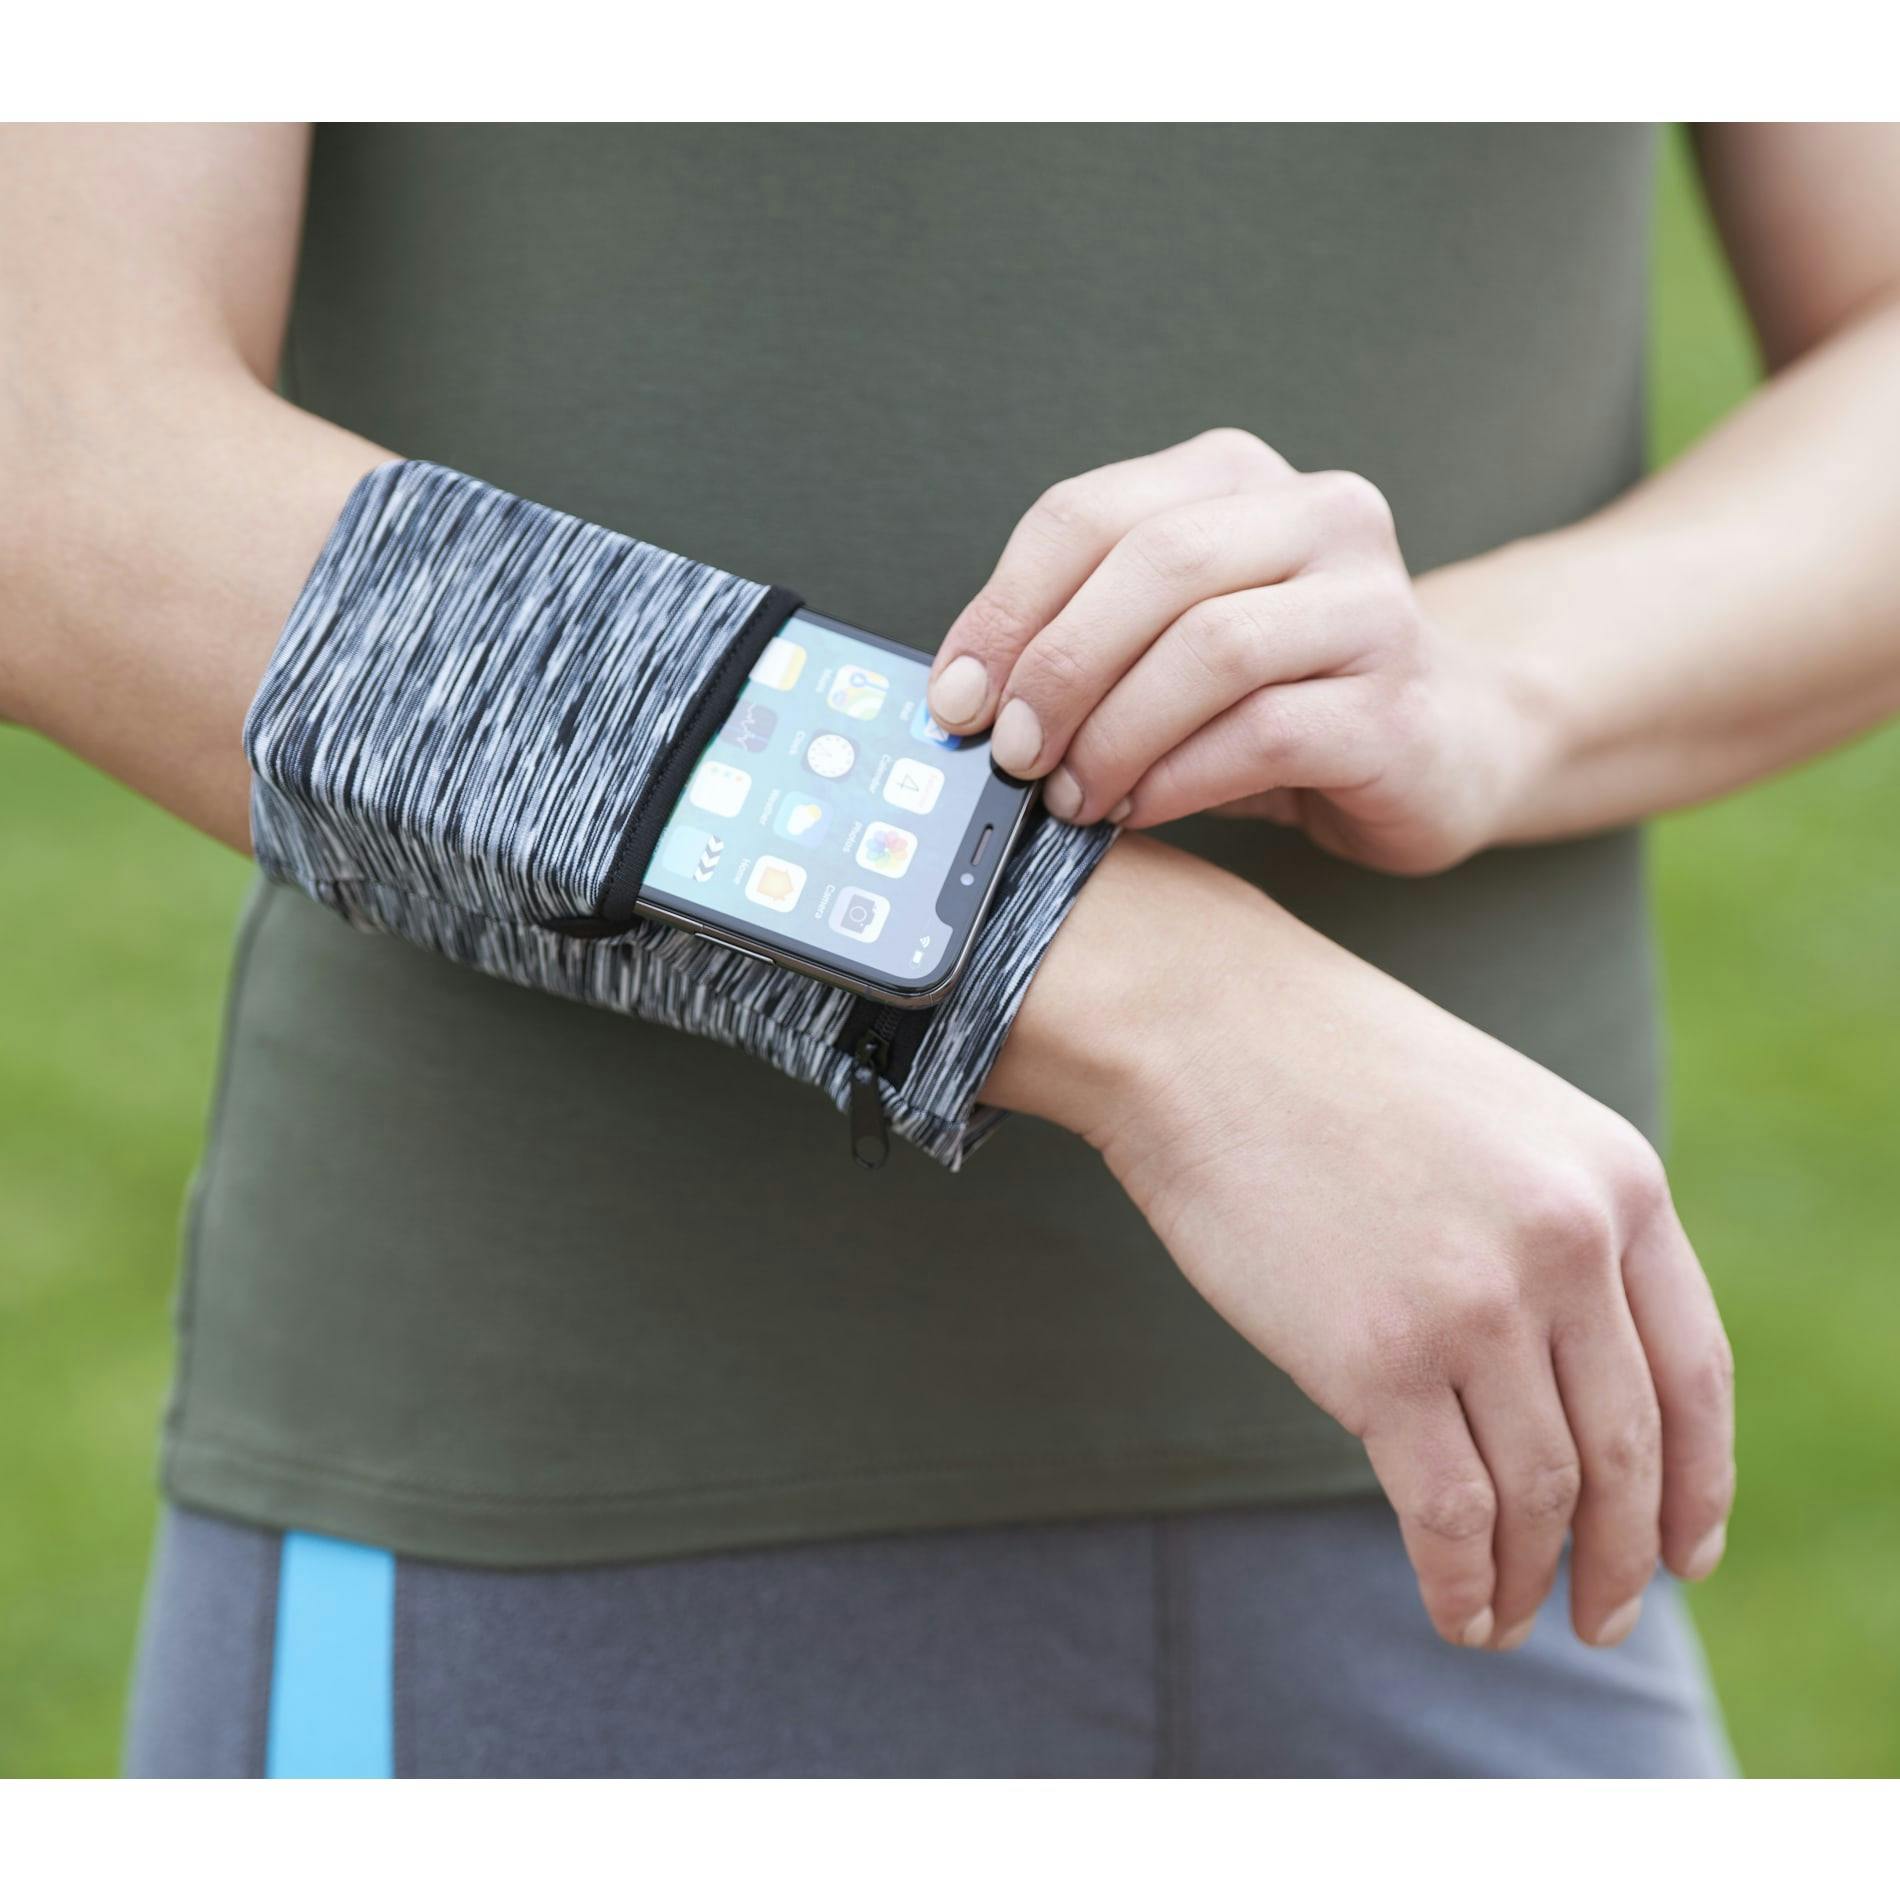 Cooling Heathered Wrist Band with Pocket - additional Image 1